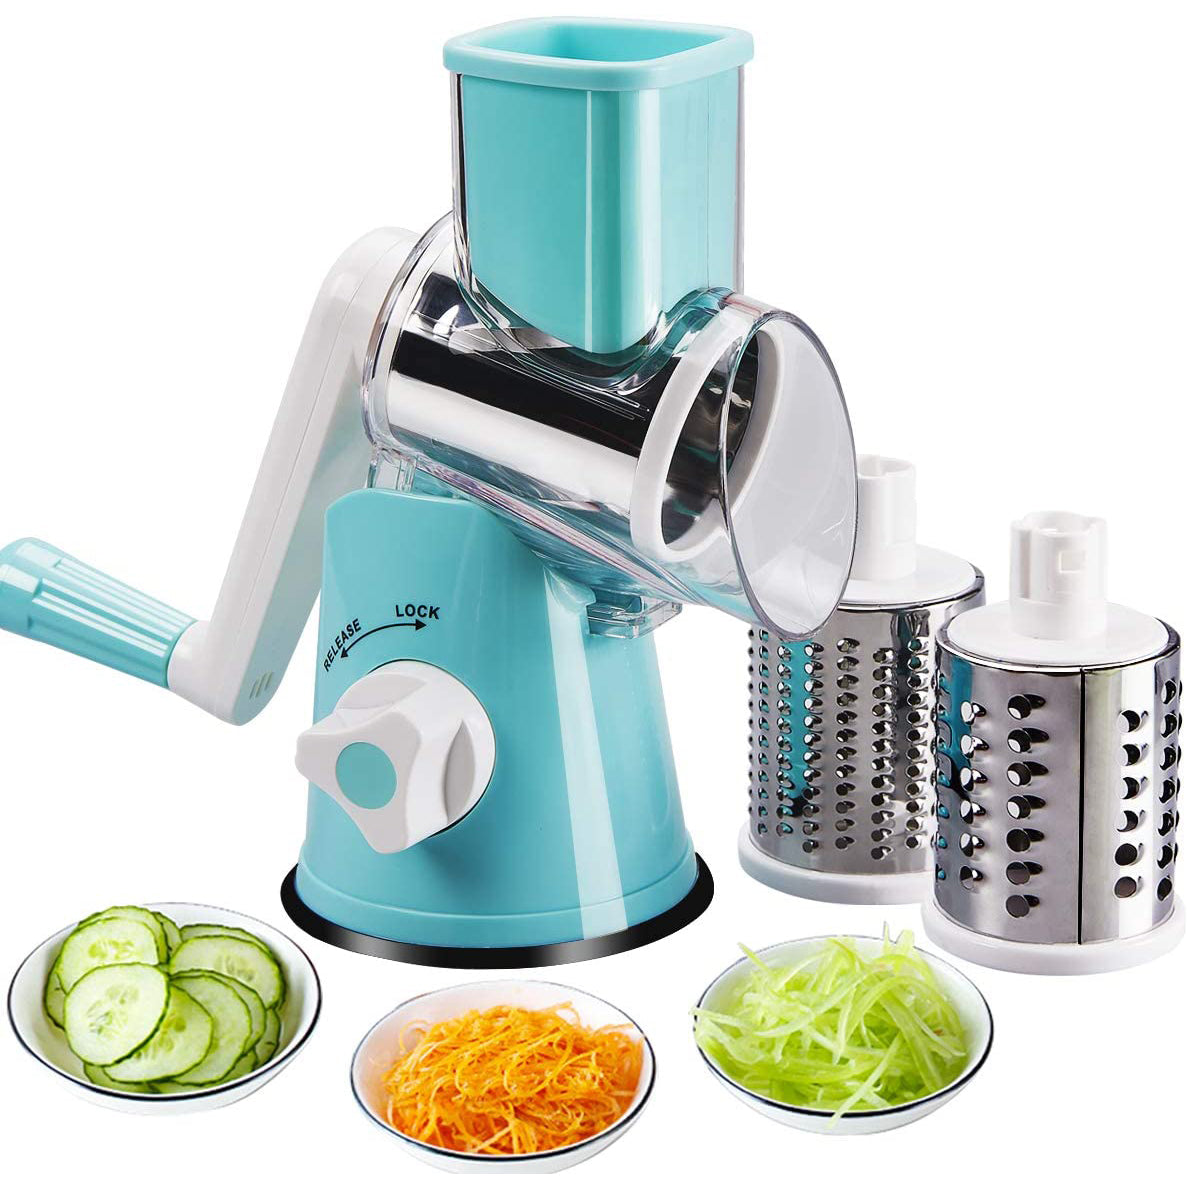 https://dailysale.com/cdn/shop/products/favia-rotary-cheese-grater-with-handle-food-shredder-with-3-stainless-steel-drum-blades-kitchen-appliances-blue-dailysale-419638.jpg?v=1656039340